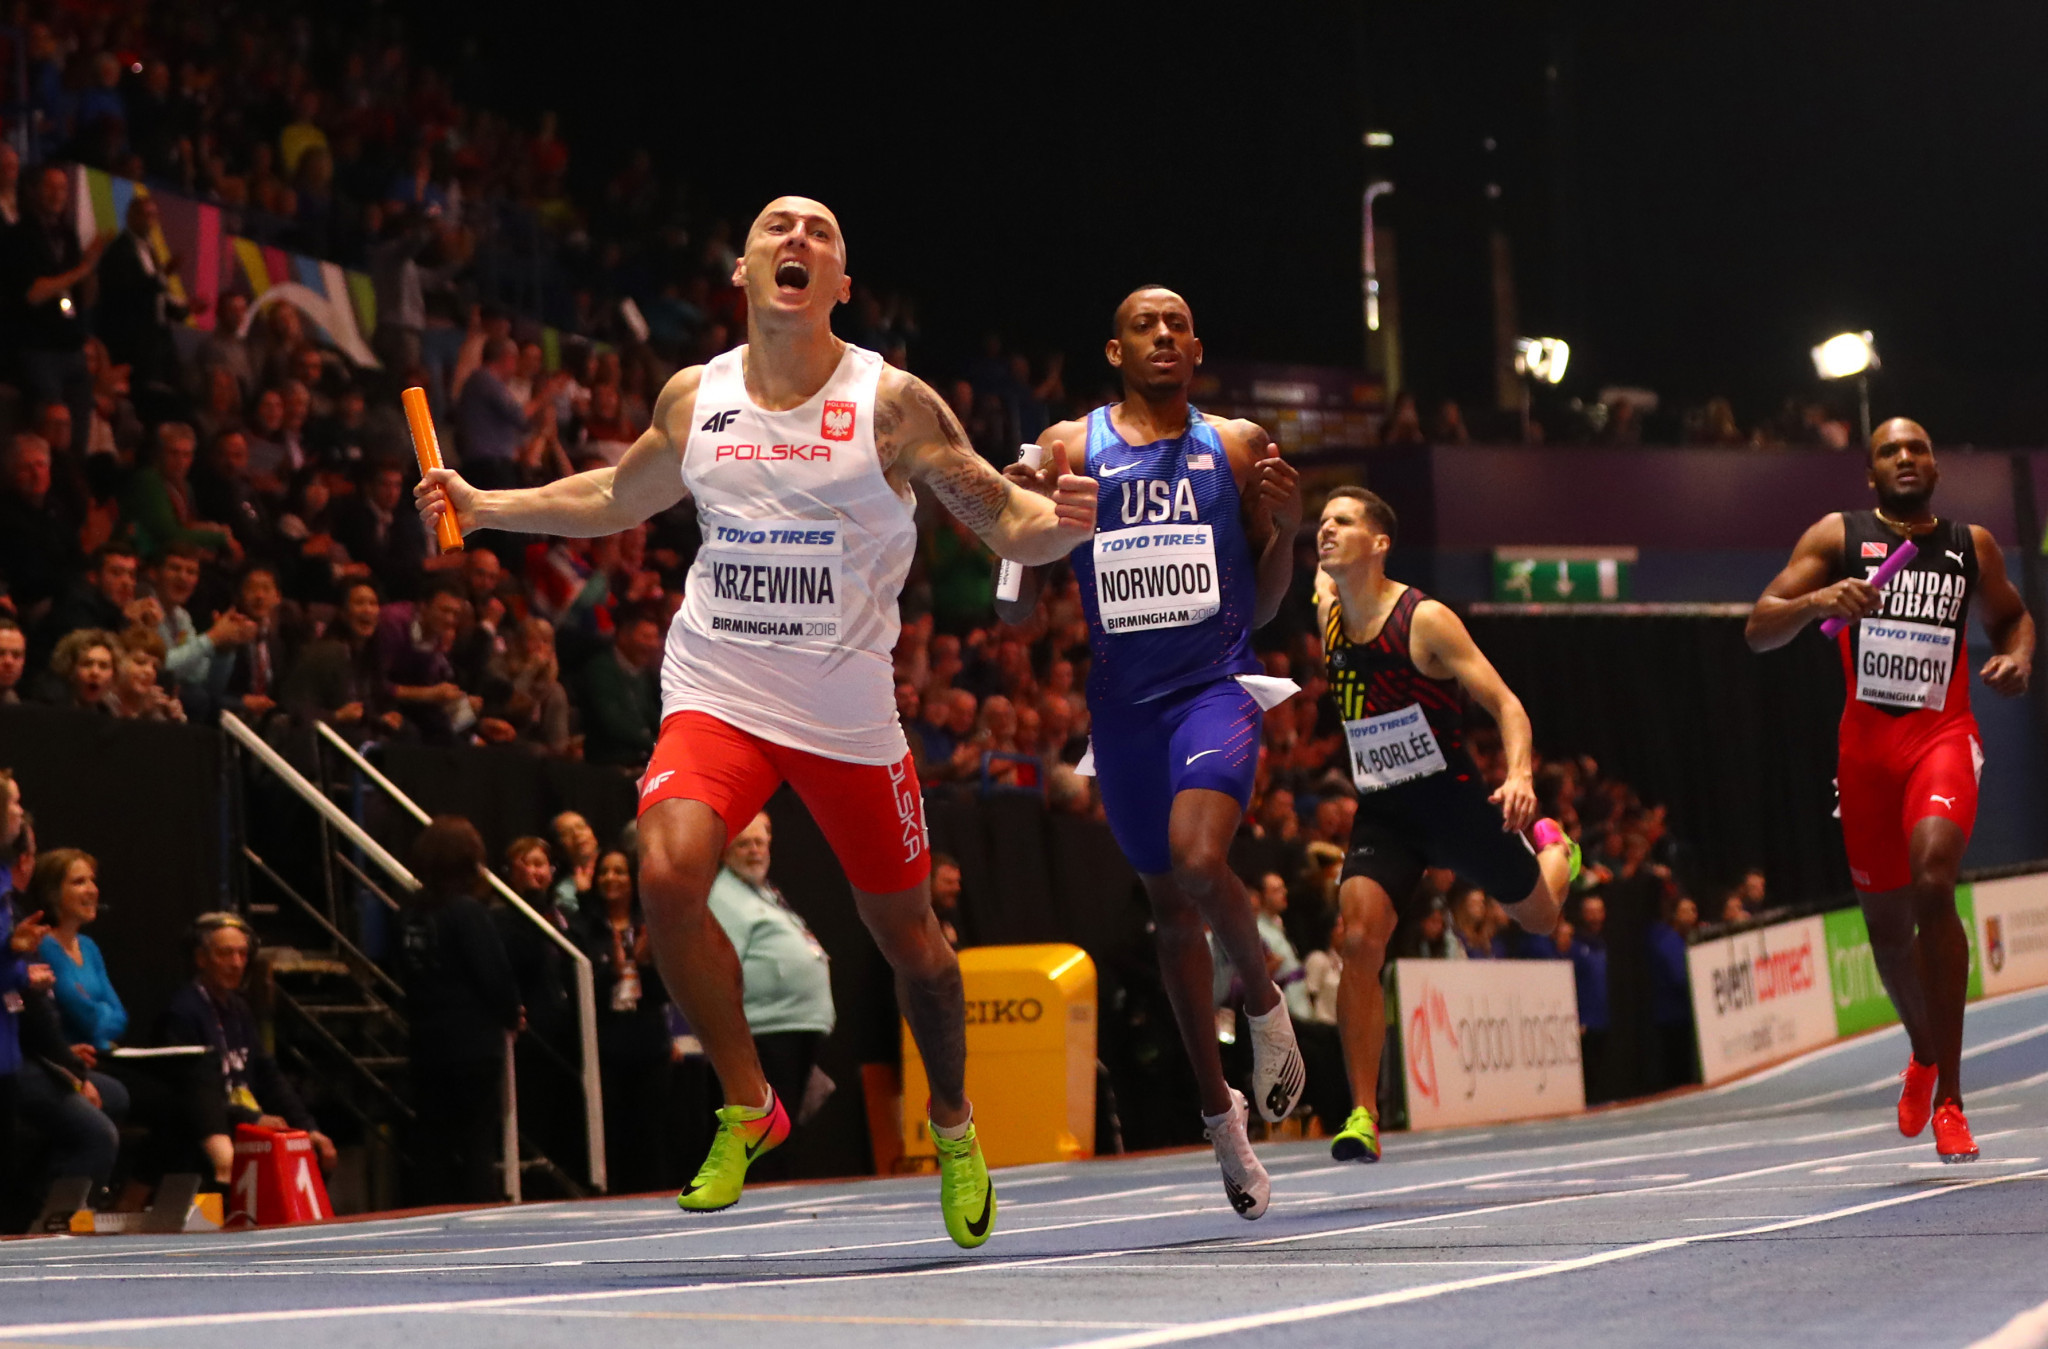 Birmingham has staged the World Athletics Indoor Championships in 2003 and 2018 ©Getty Images